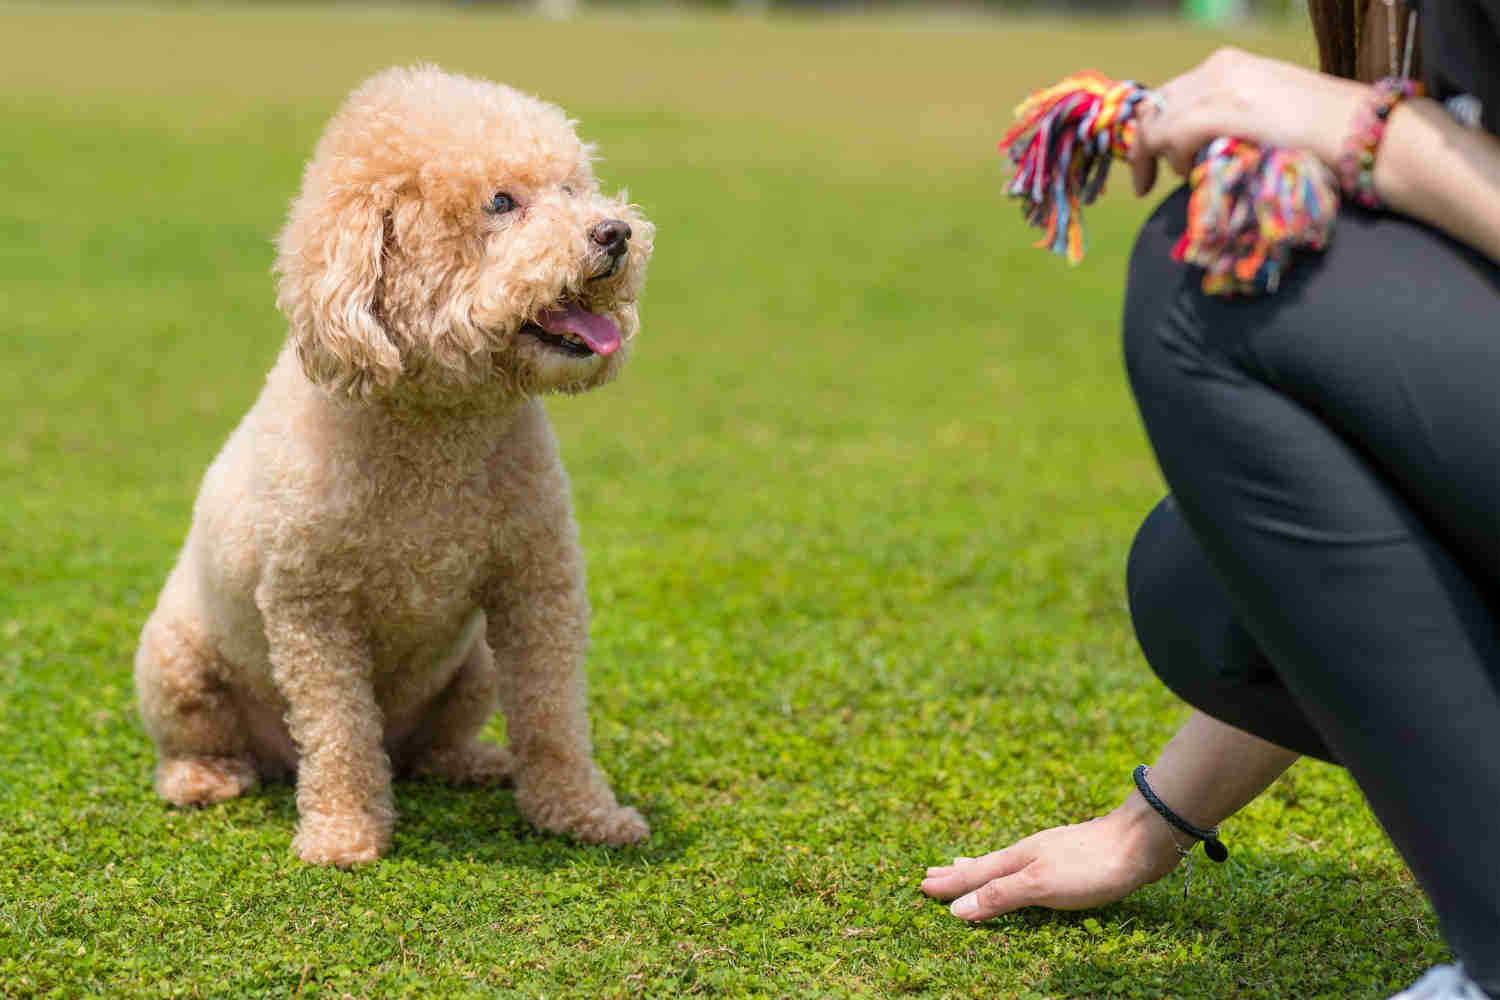 What are some ways to gradually introduce your Poodle puppy to different types of food?